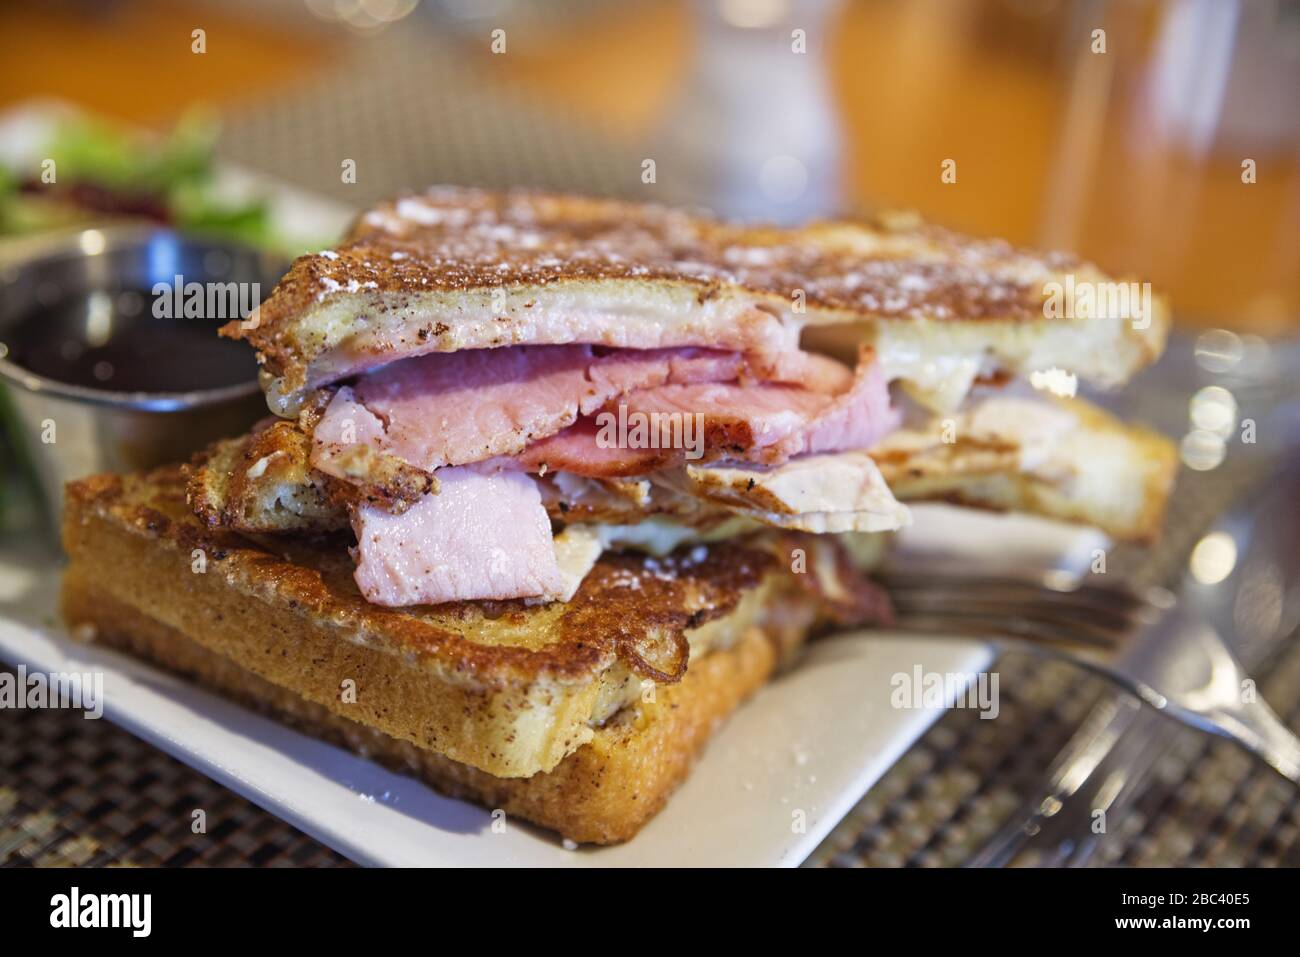 French toast ham and cheese sandwich on a plate with selective focus Stock Photo